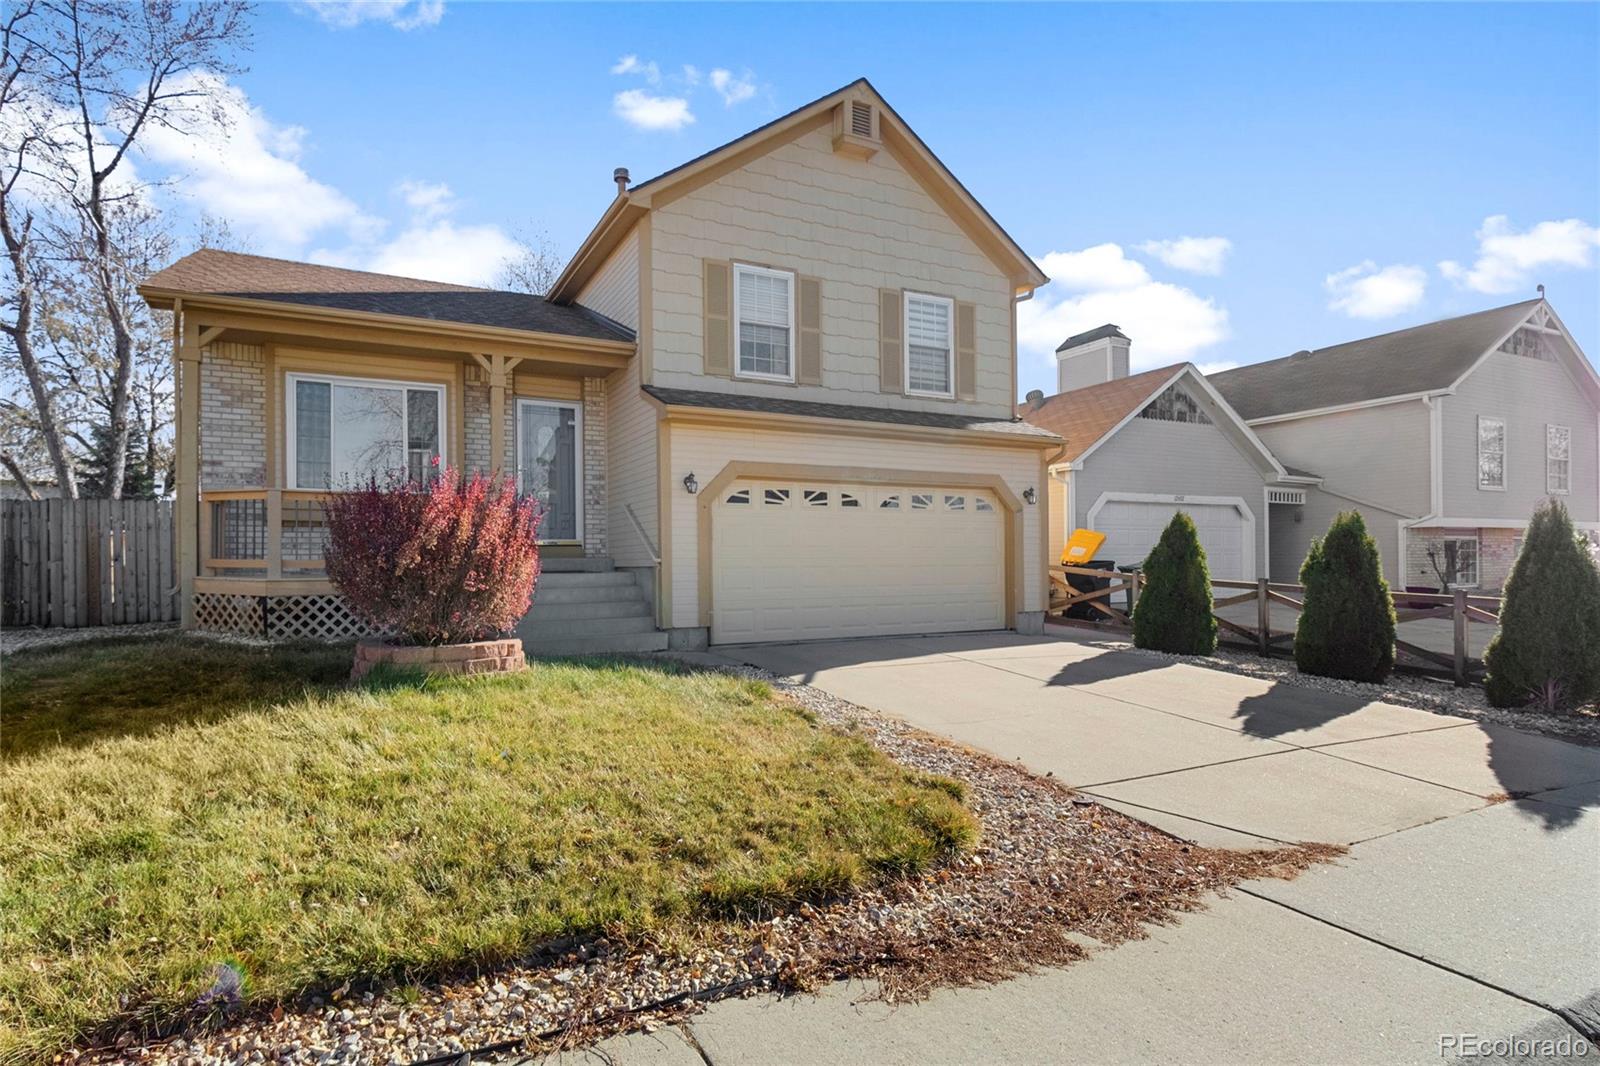 12634  james court, broomfield sold home. Closed on 2024-04-11 for $525,000.